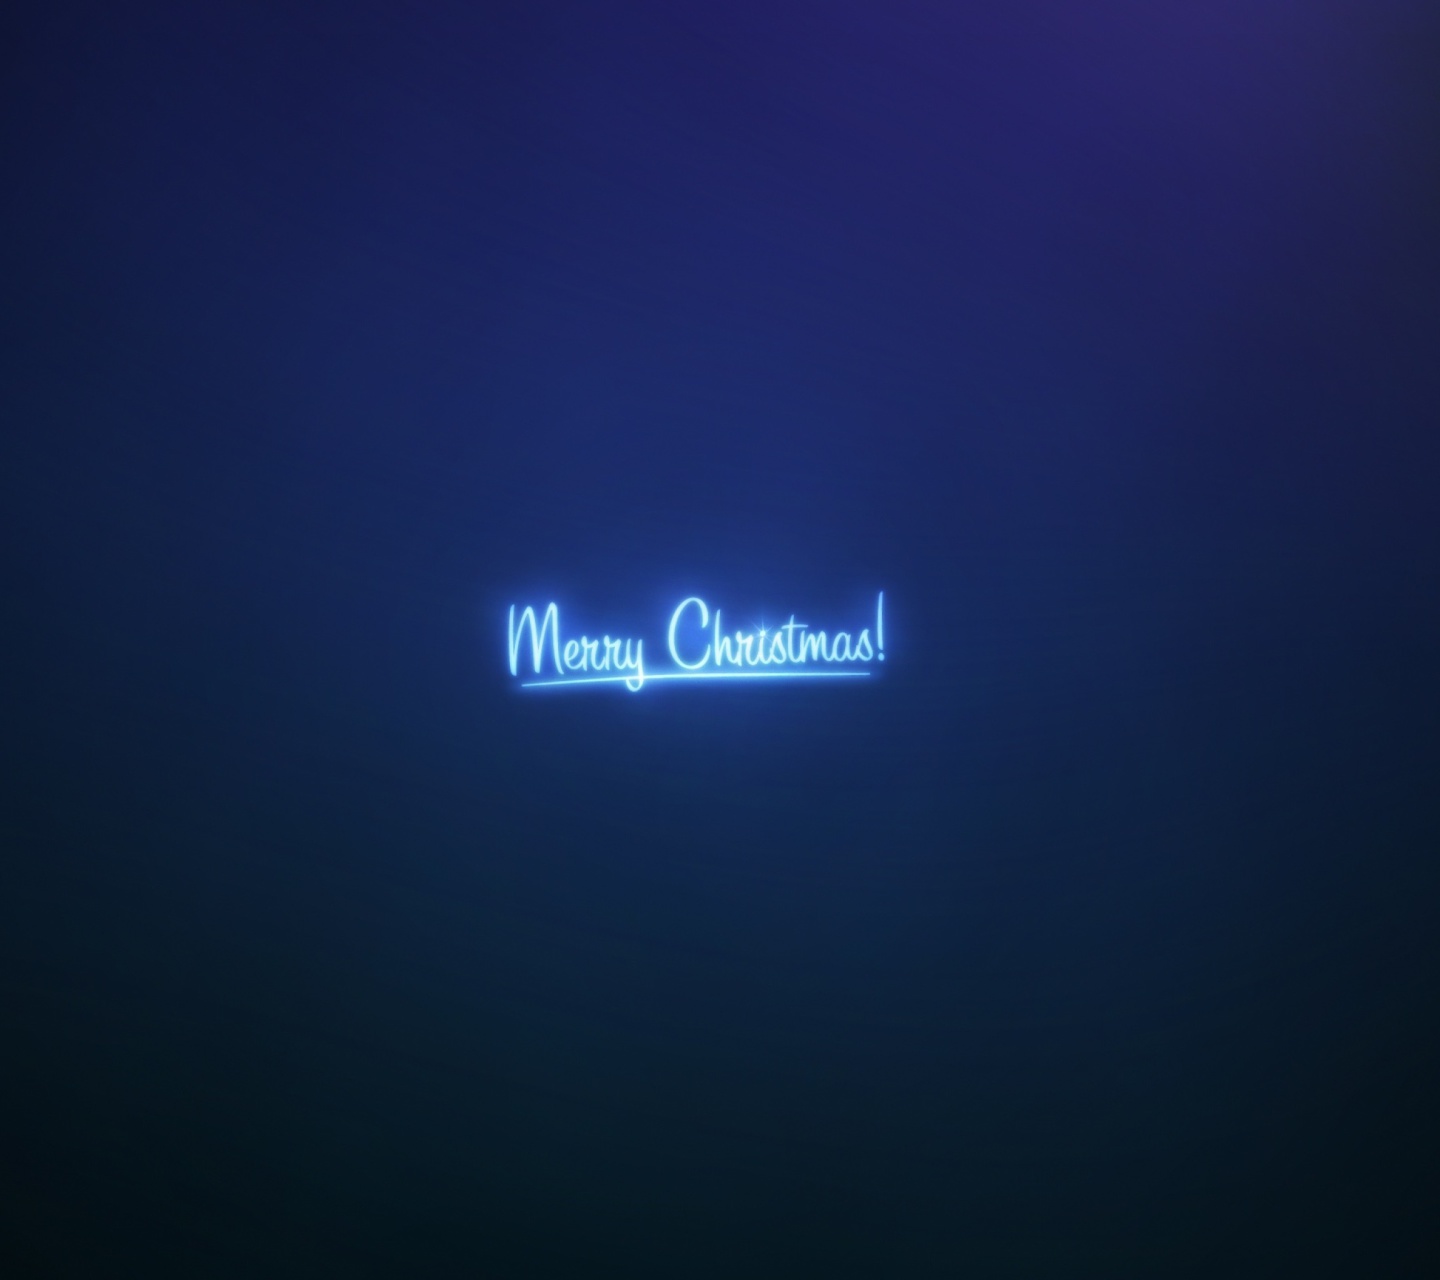 We Wish You a Merry Christmas wallpaper 1440x1280